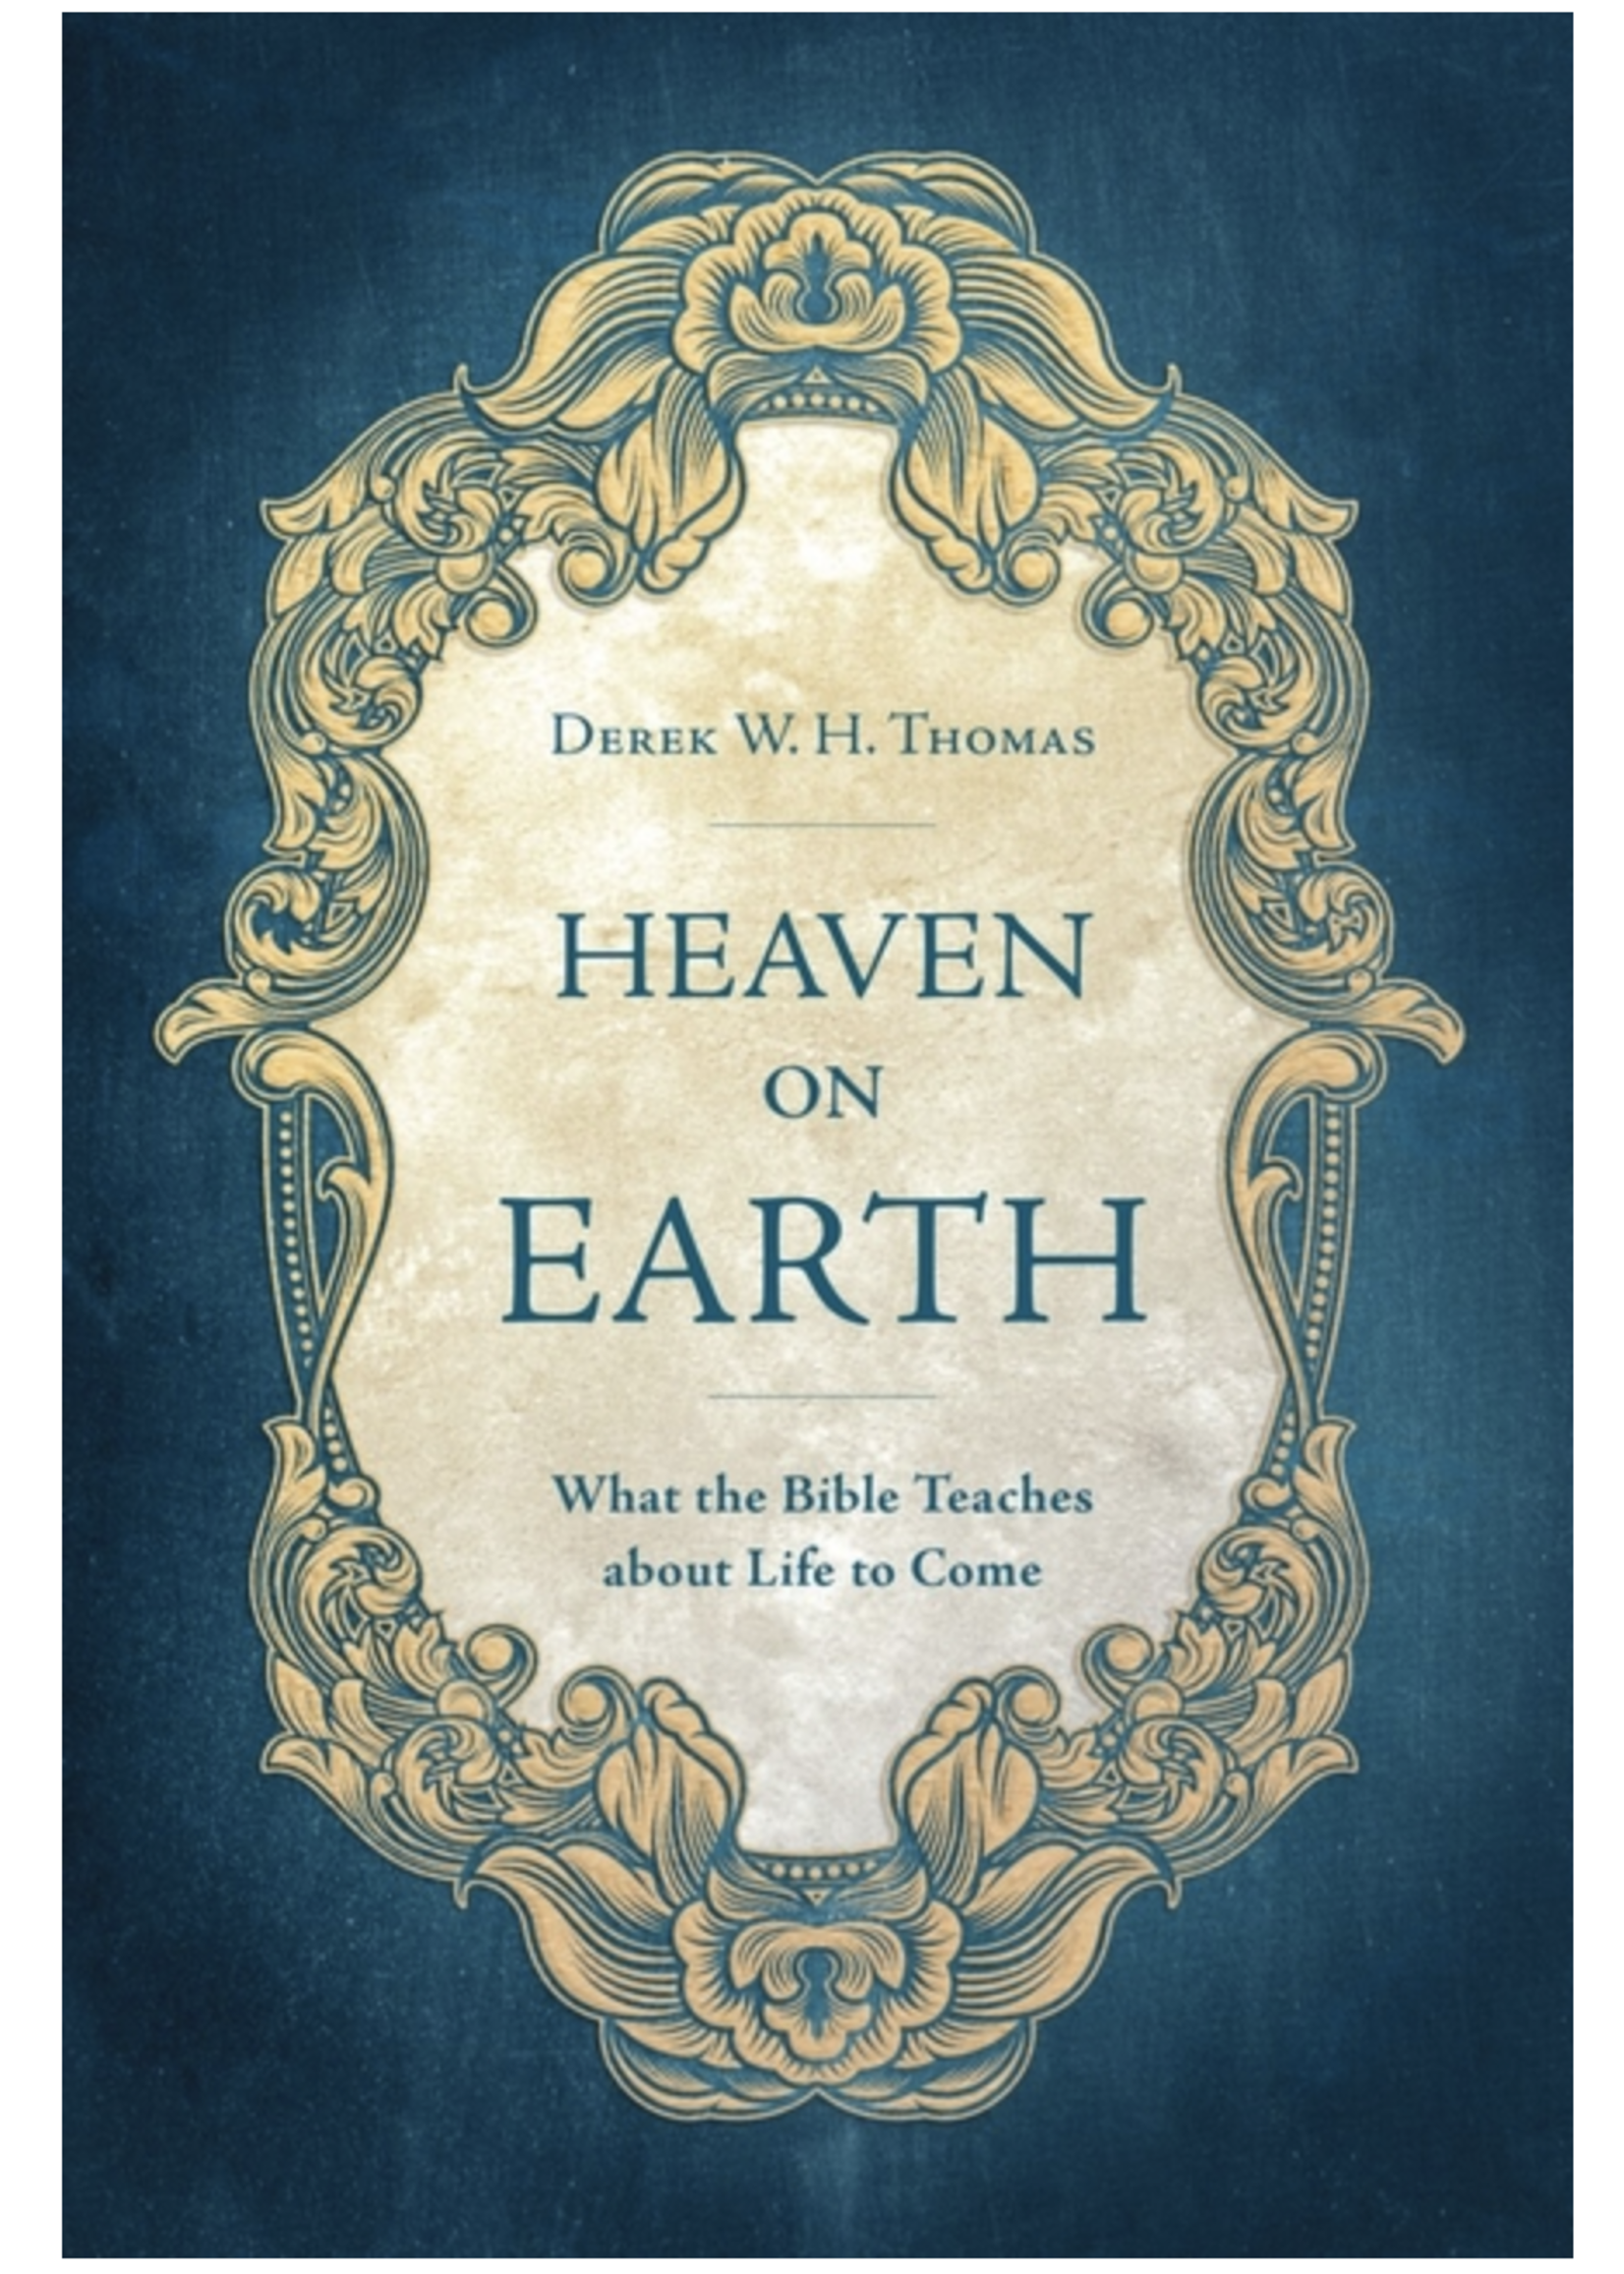 Heaven on Earth:  What the Bible Teaches about Life to Come